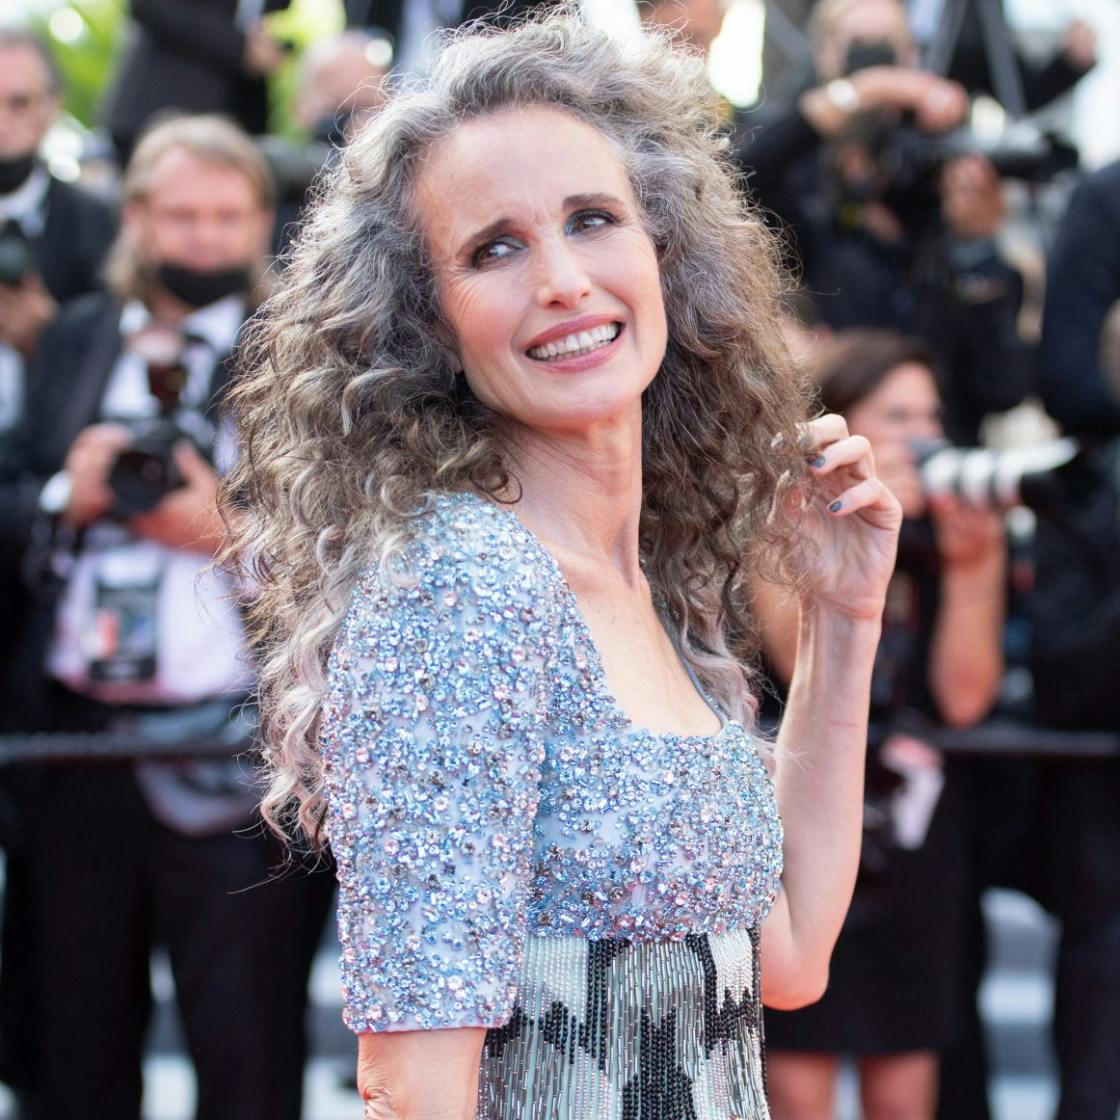 Grey hair trend: Andie MacDowell's grombre hair at Cannes 2021